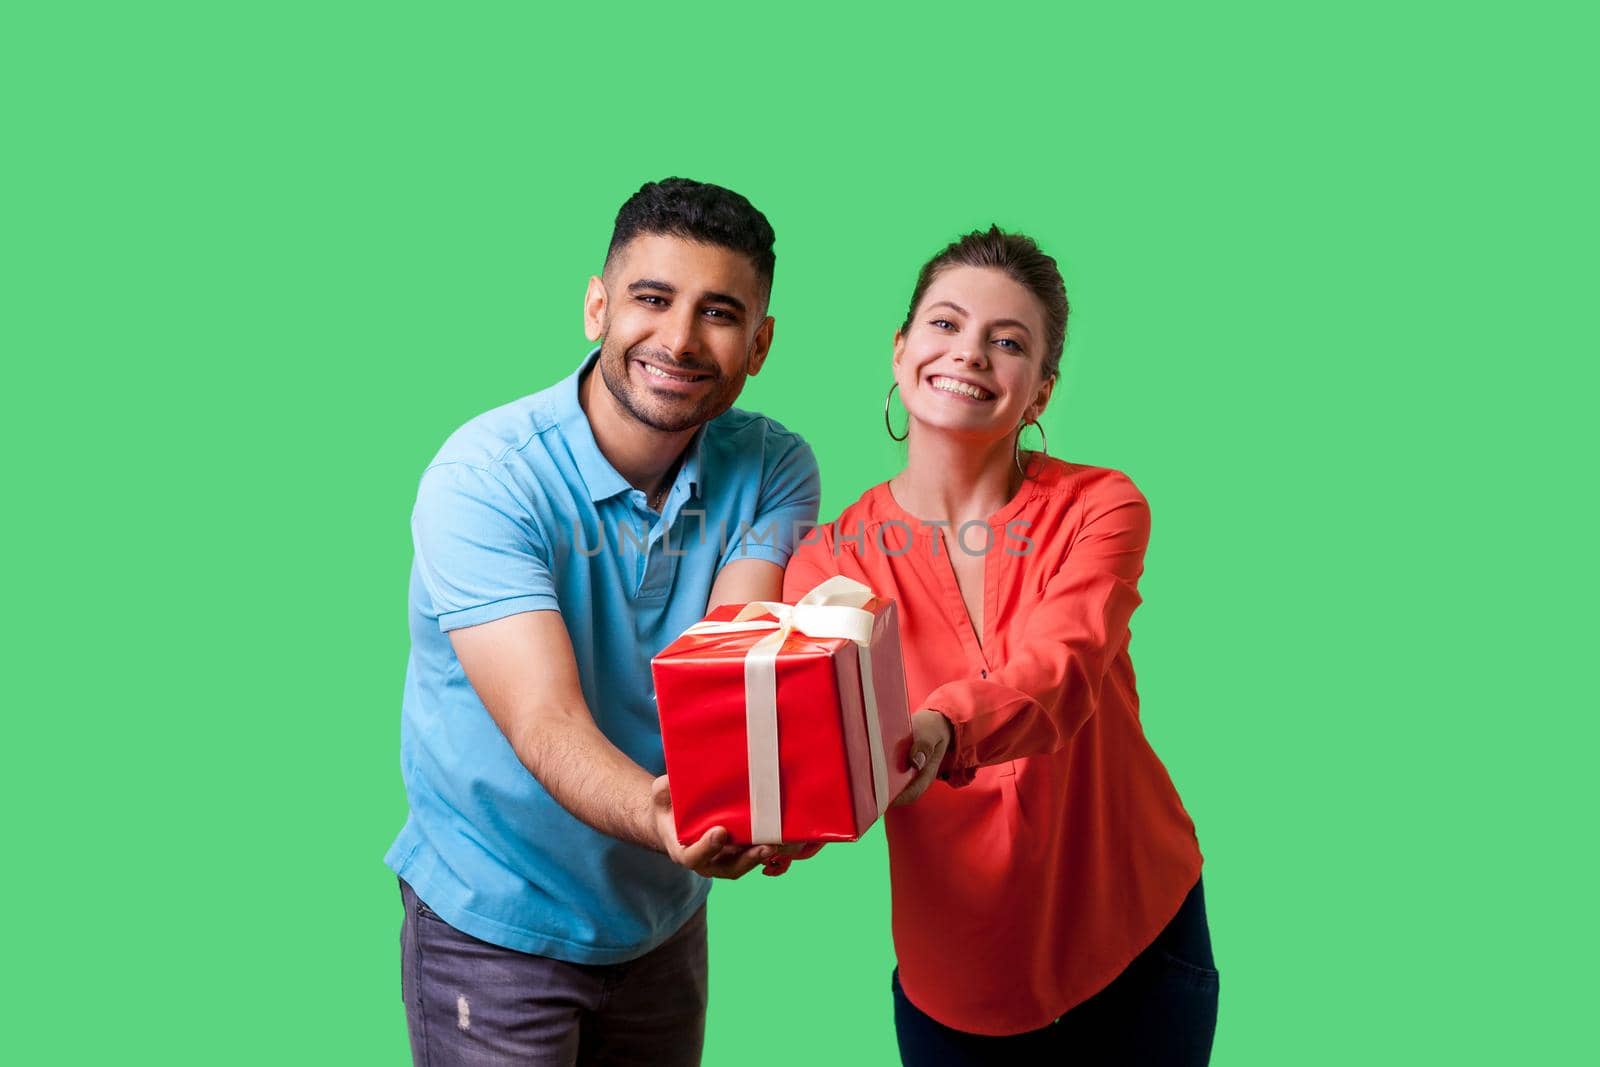 Please take your present. Young generous couple giving gift box to camera, looking with toothy smile, sharing present on holidays, charity concept. isolated on green background, indoor studio shot